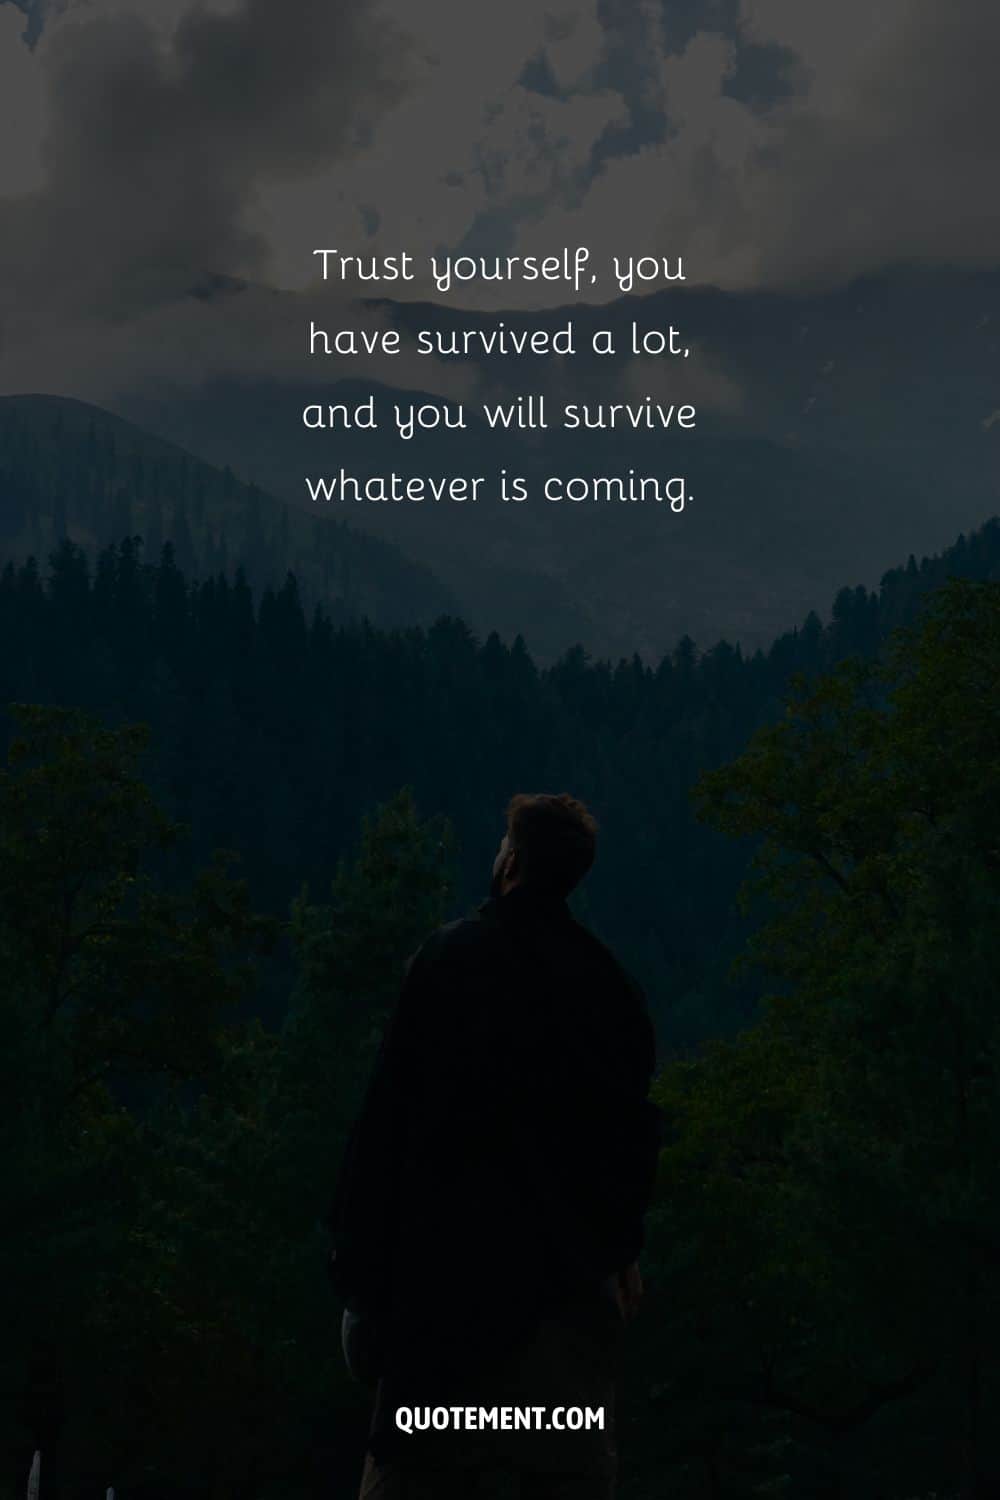 Trust yourself, you have survived a lot, and you will survive whatever is coming